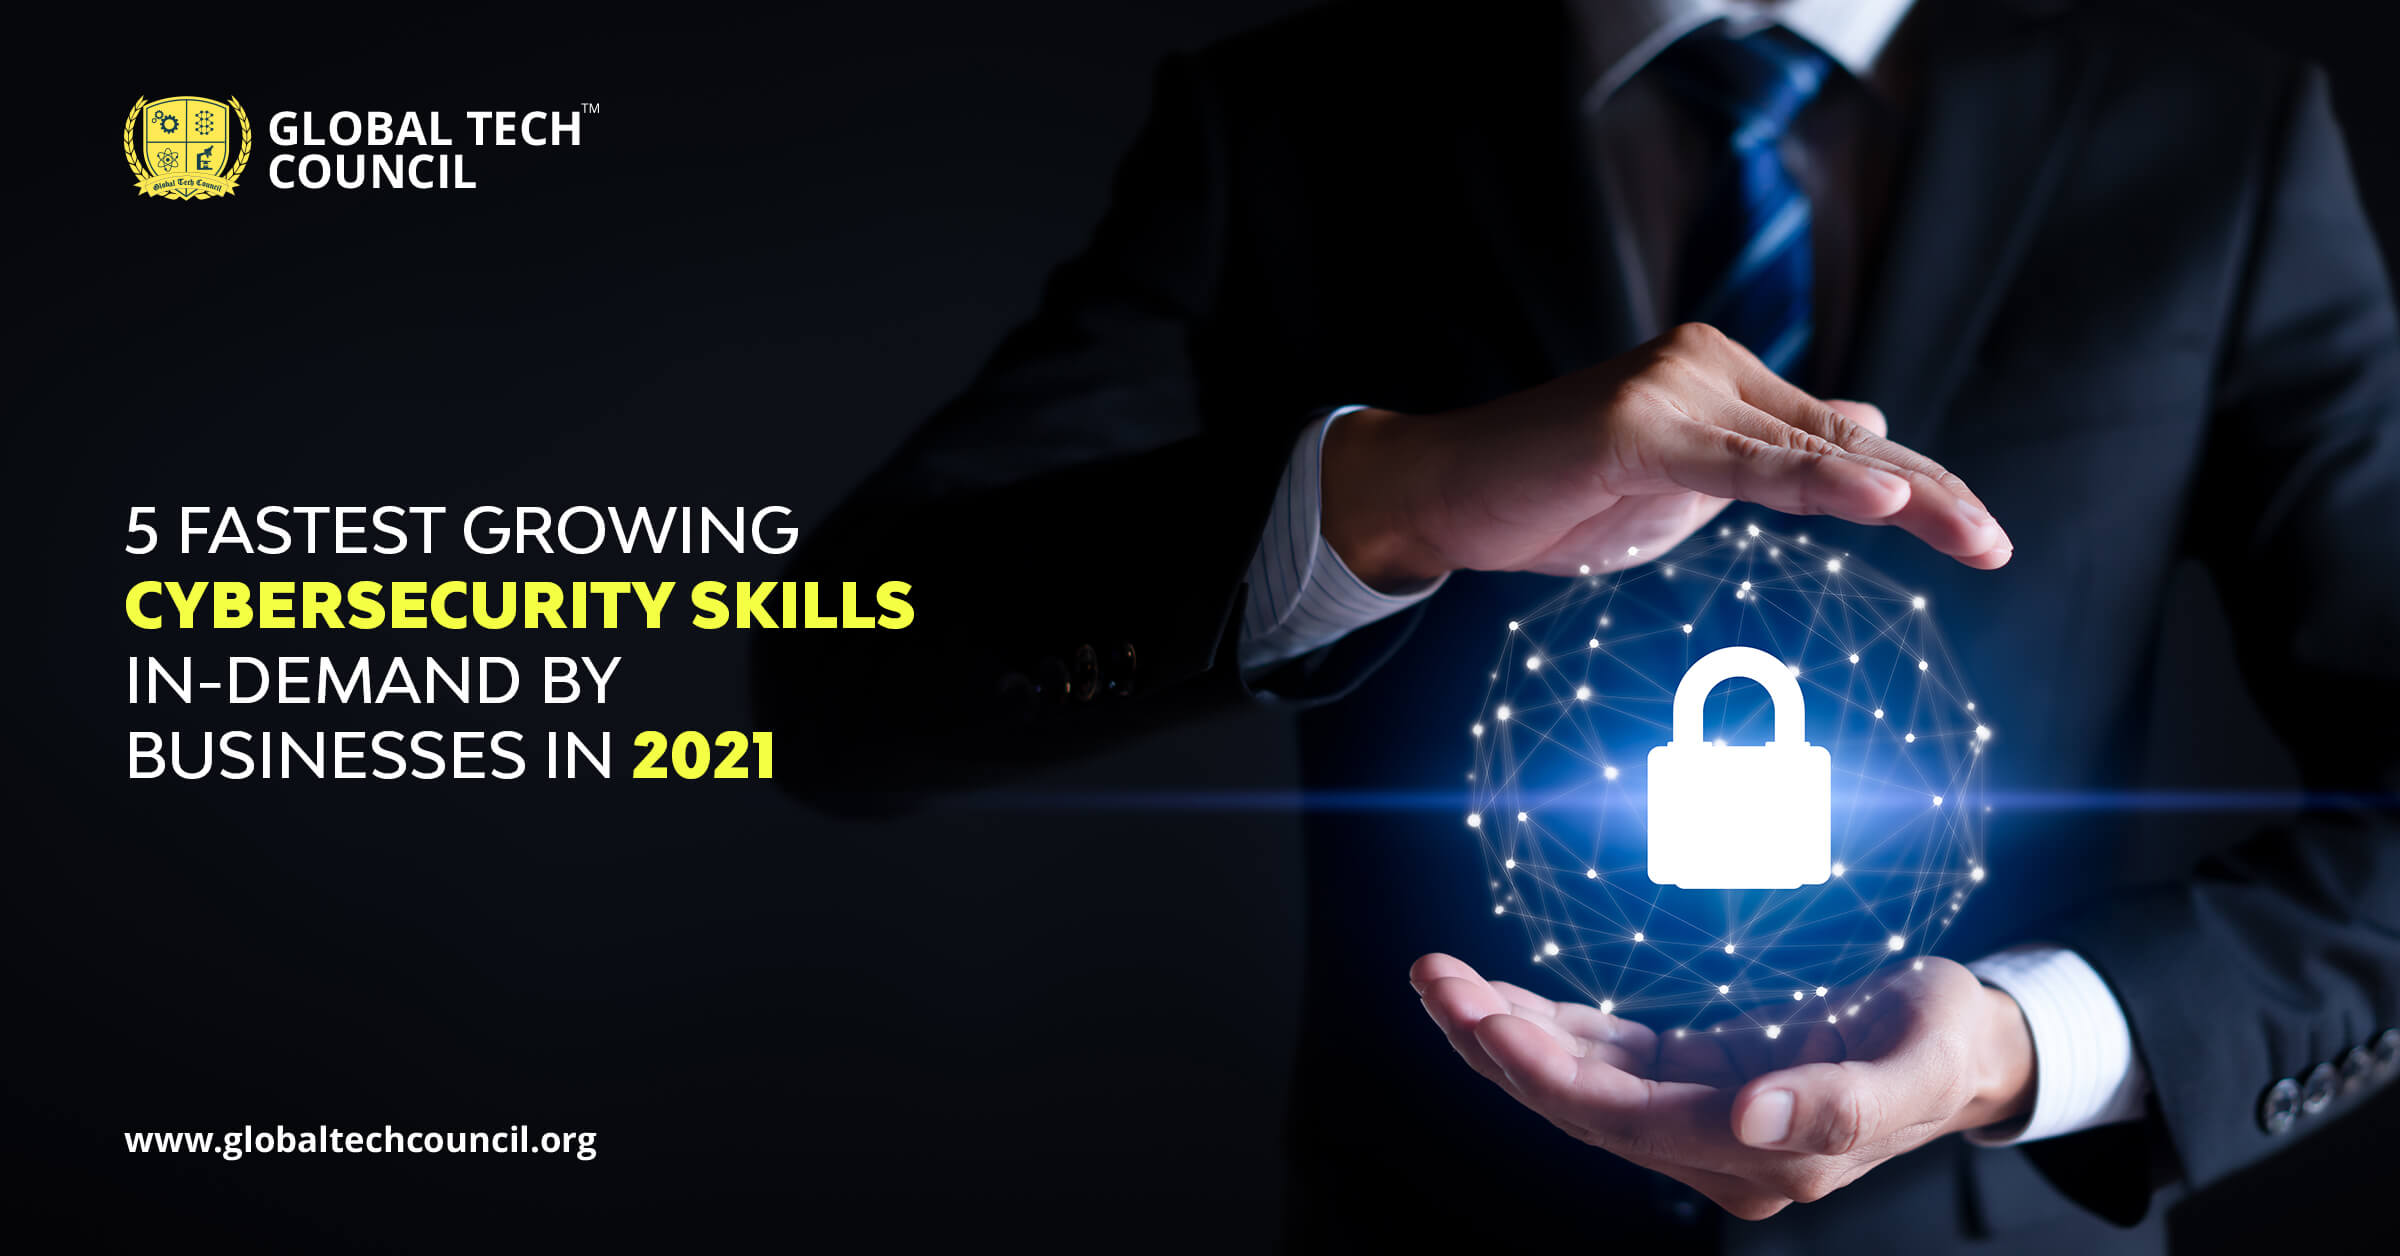 Cybersecurity Skills In-Demand by Businesses in 2021